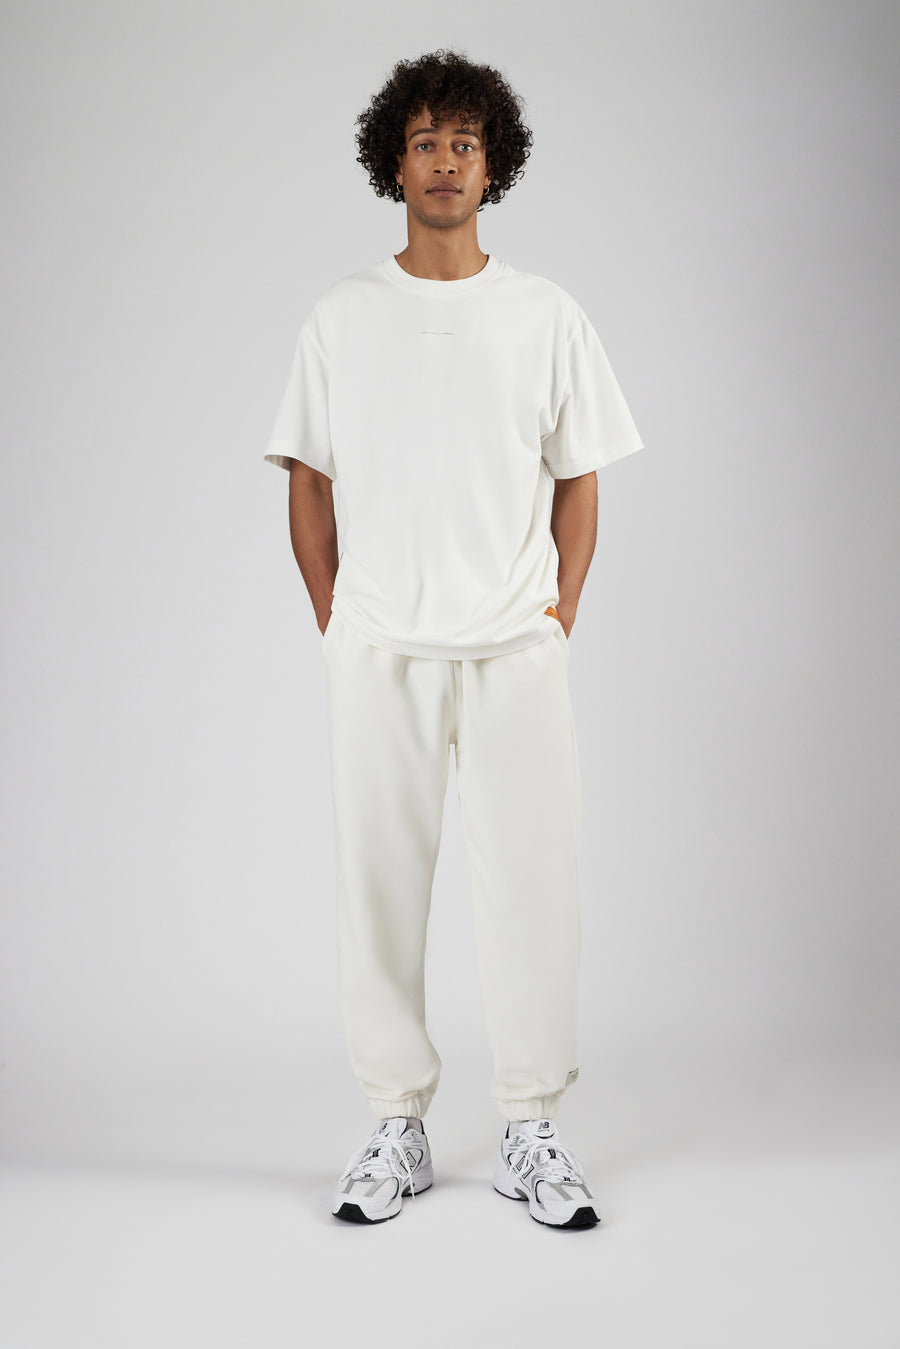 Man wearing sweatpants in color eggnog and oversized t-shirt